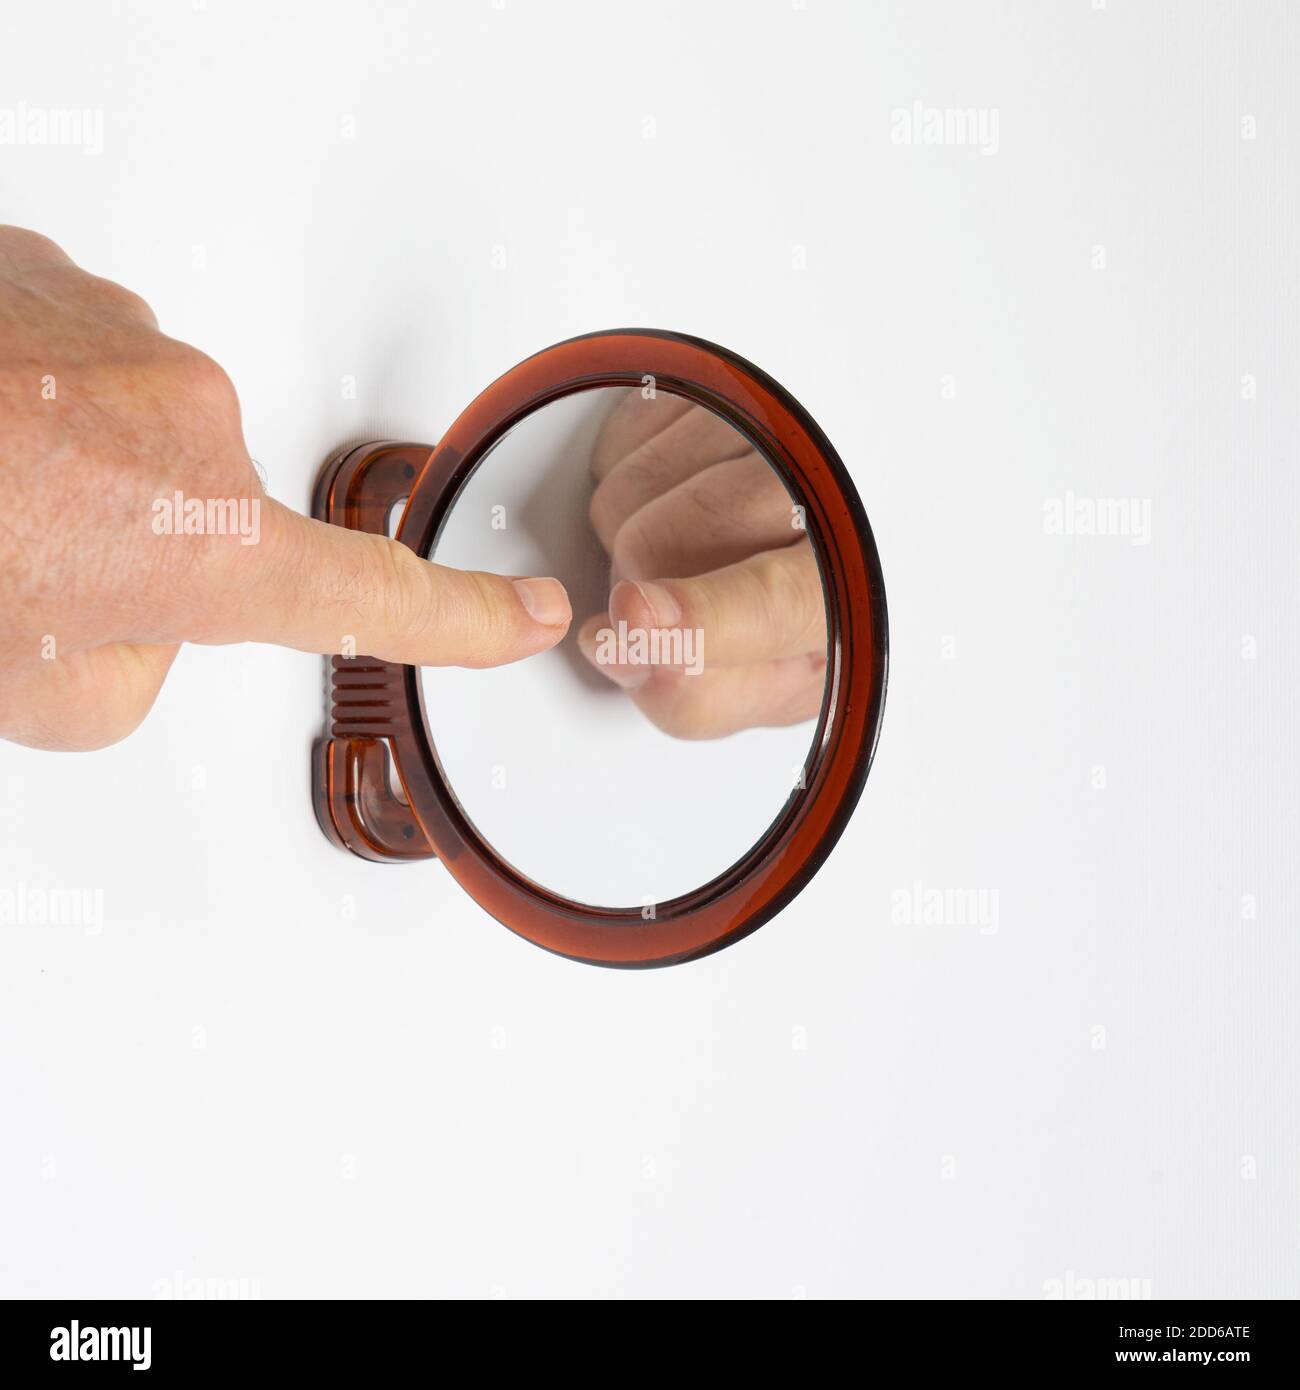 touch your ego with your hand on a mirror Stock Photo